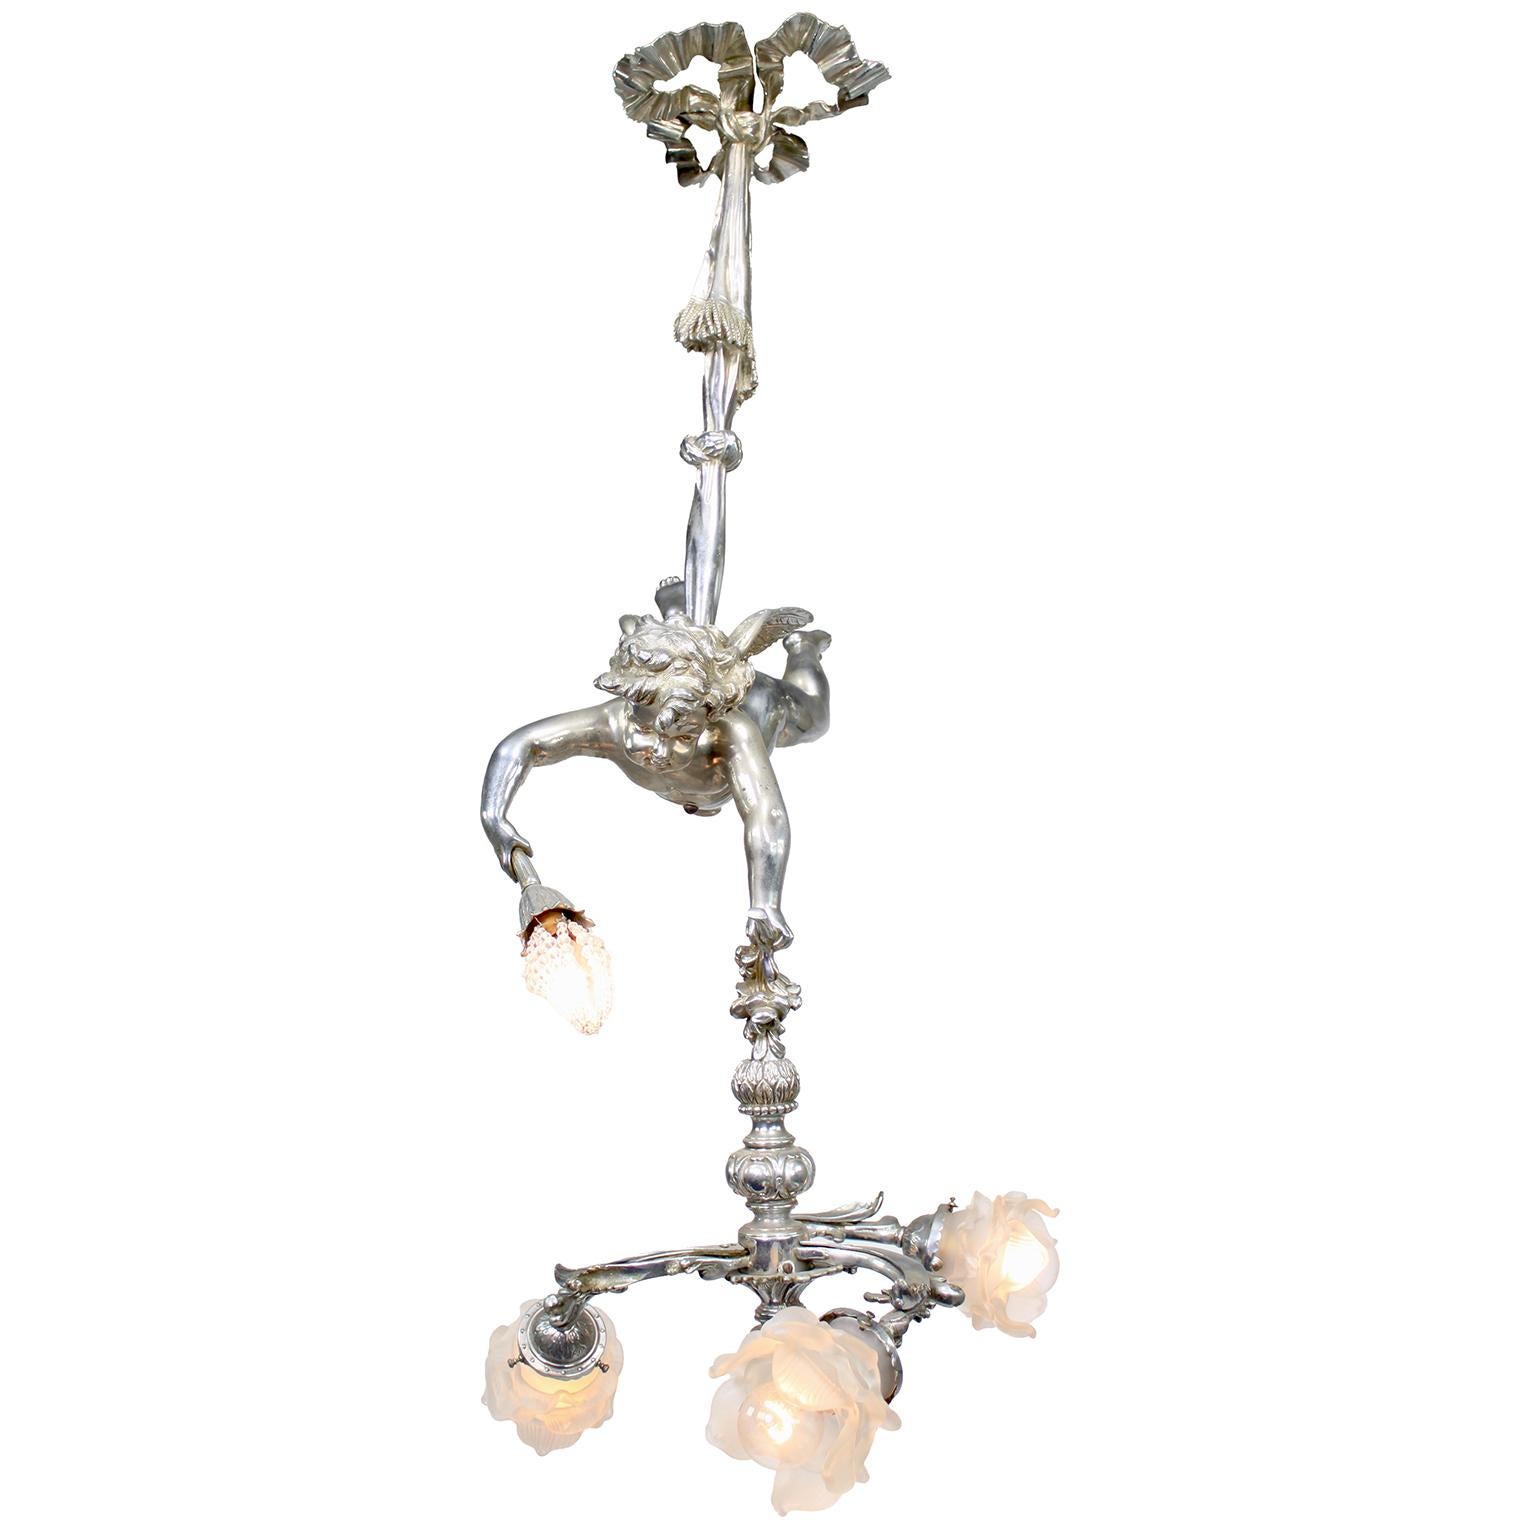 A Fine Whimsical French Belle Époque Silvered Bronze Four-Light Cherub Figural Hanging Chandelier. The charming cherub, scantily clad, hovers while suspended from a tied-draped tassel holding a beaded-glass light in his right hand, while the